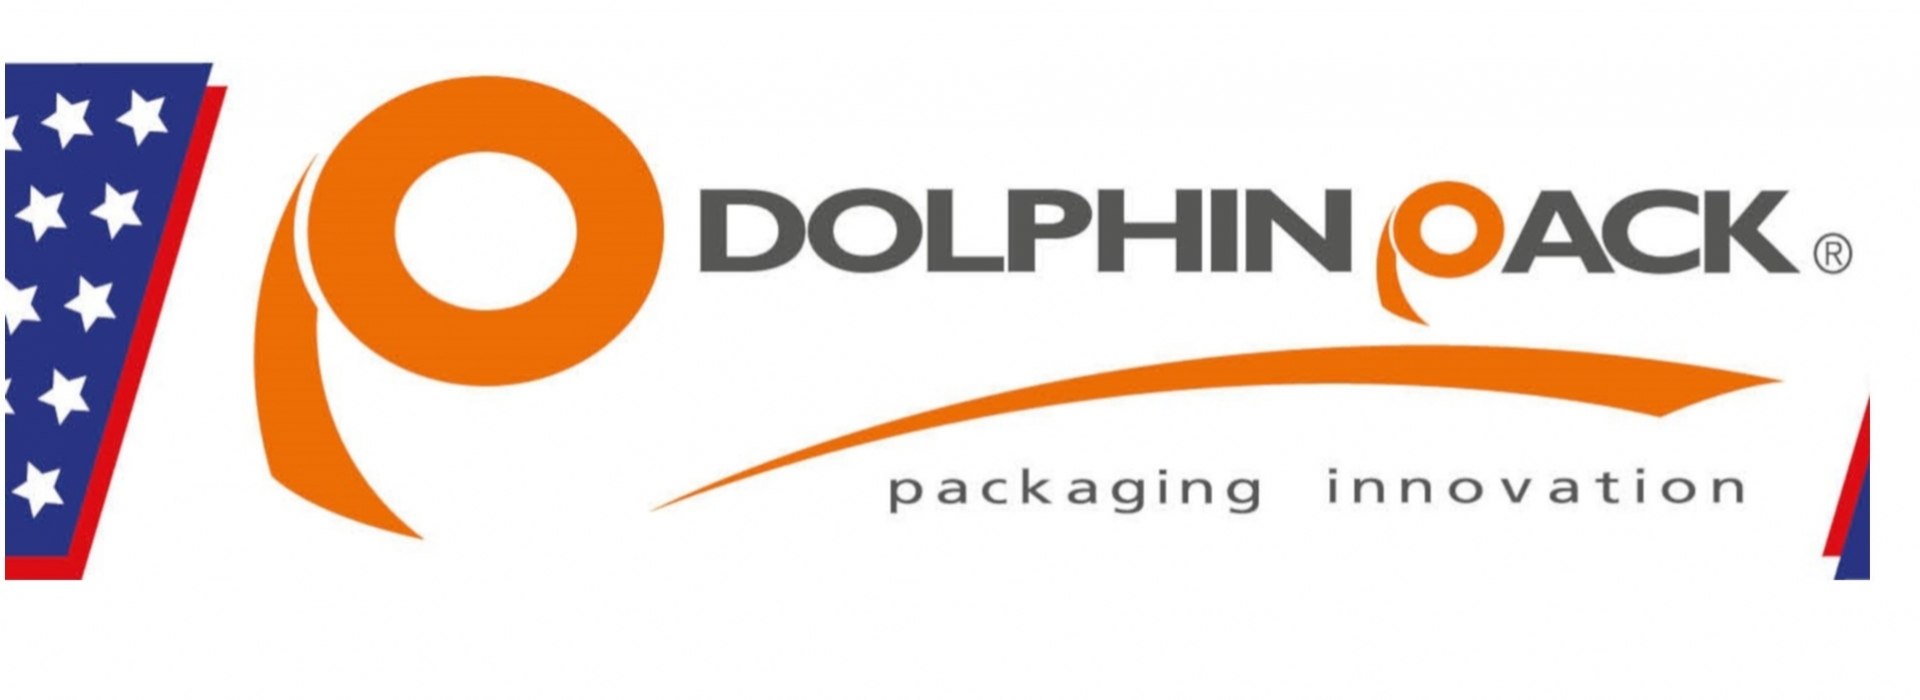 Dolphin Pack USA